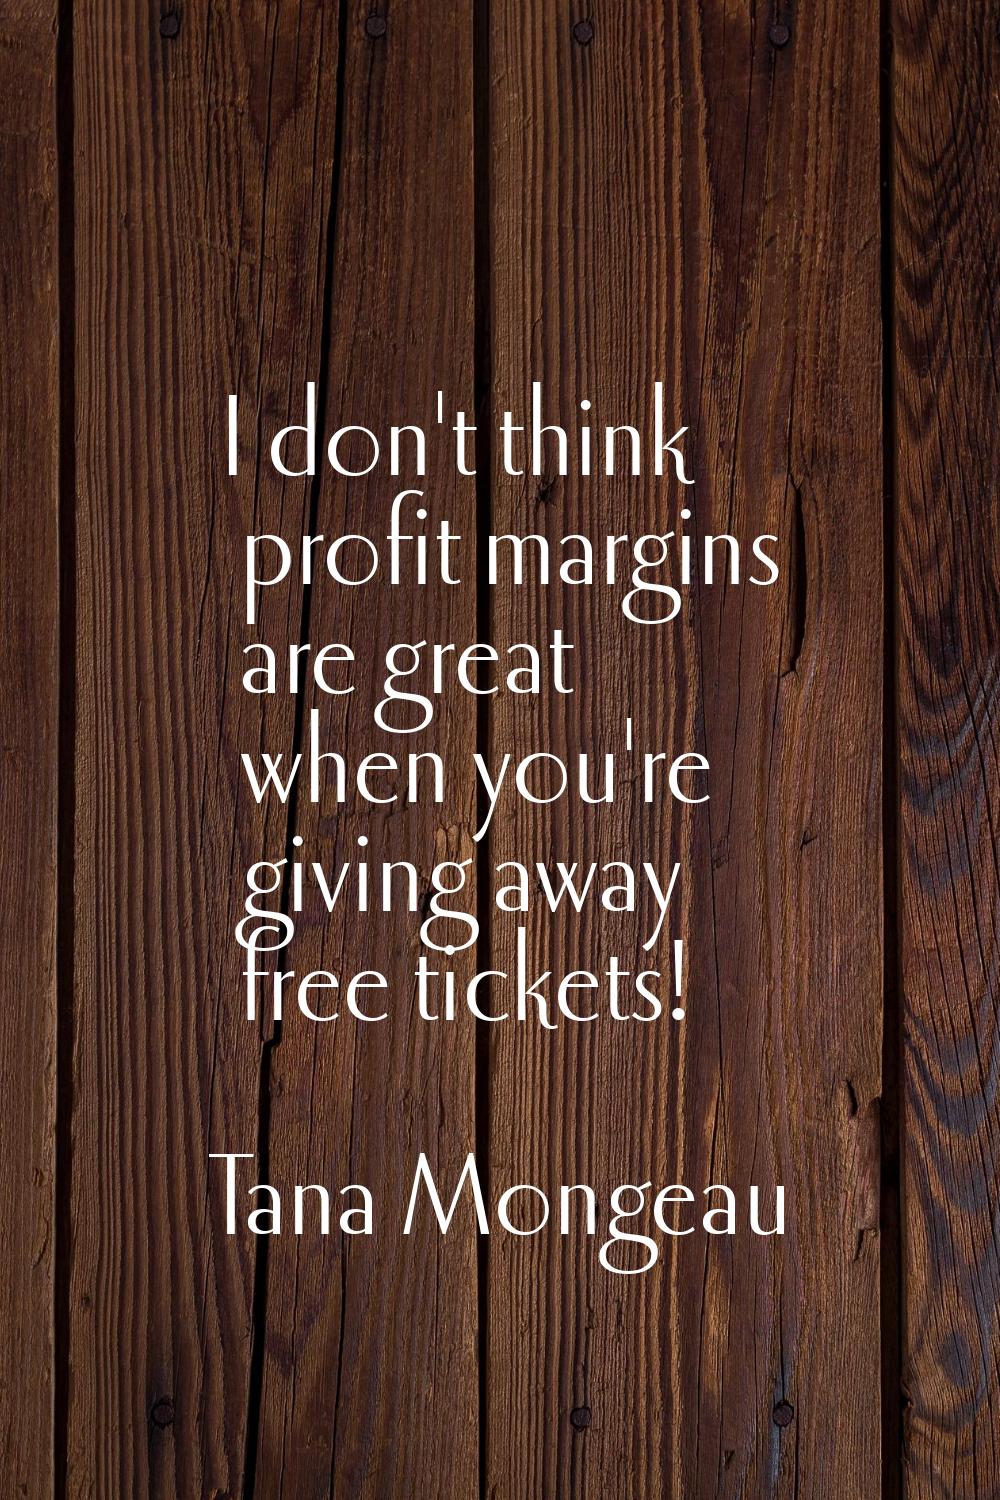 I don't think profit margins are great when you're giving away free tickets!